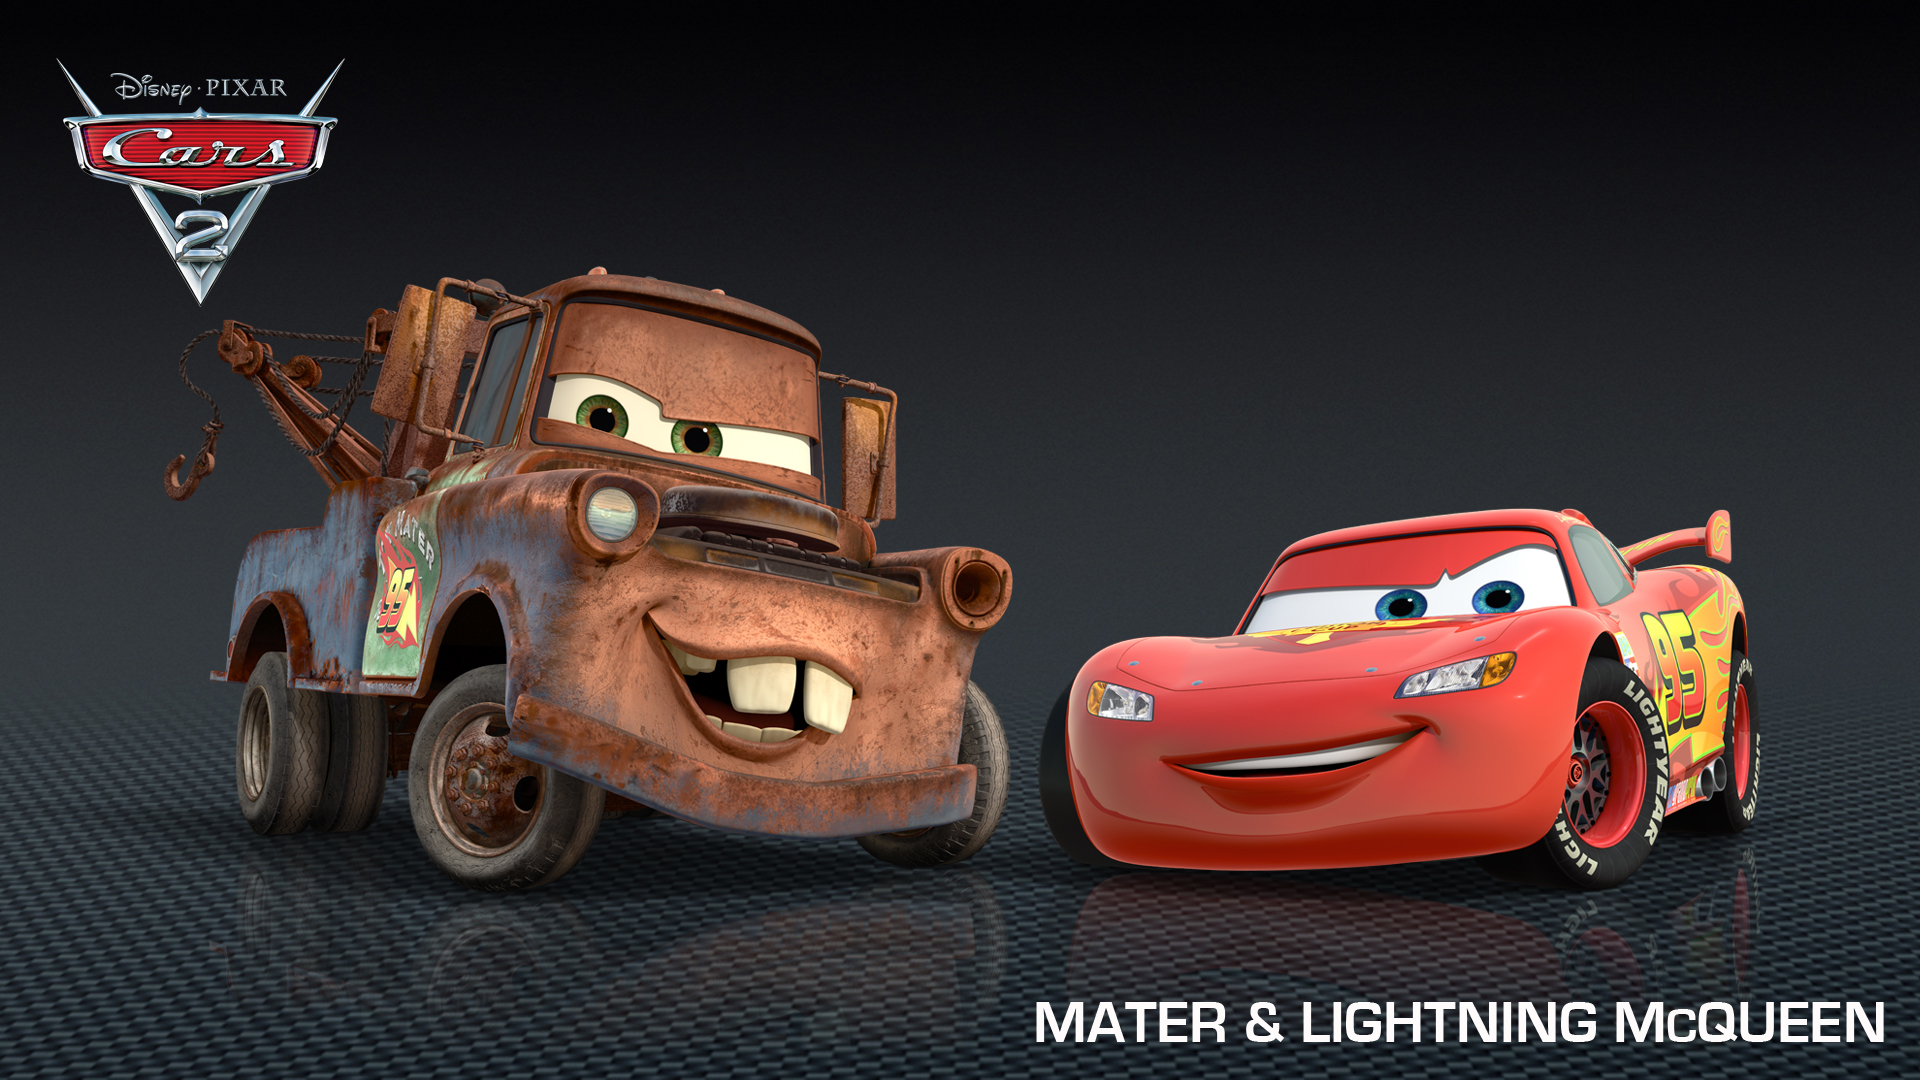 Meet the rest of the crew of Cars 2 - Scannain